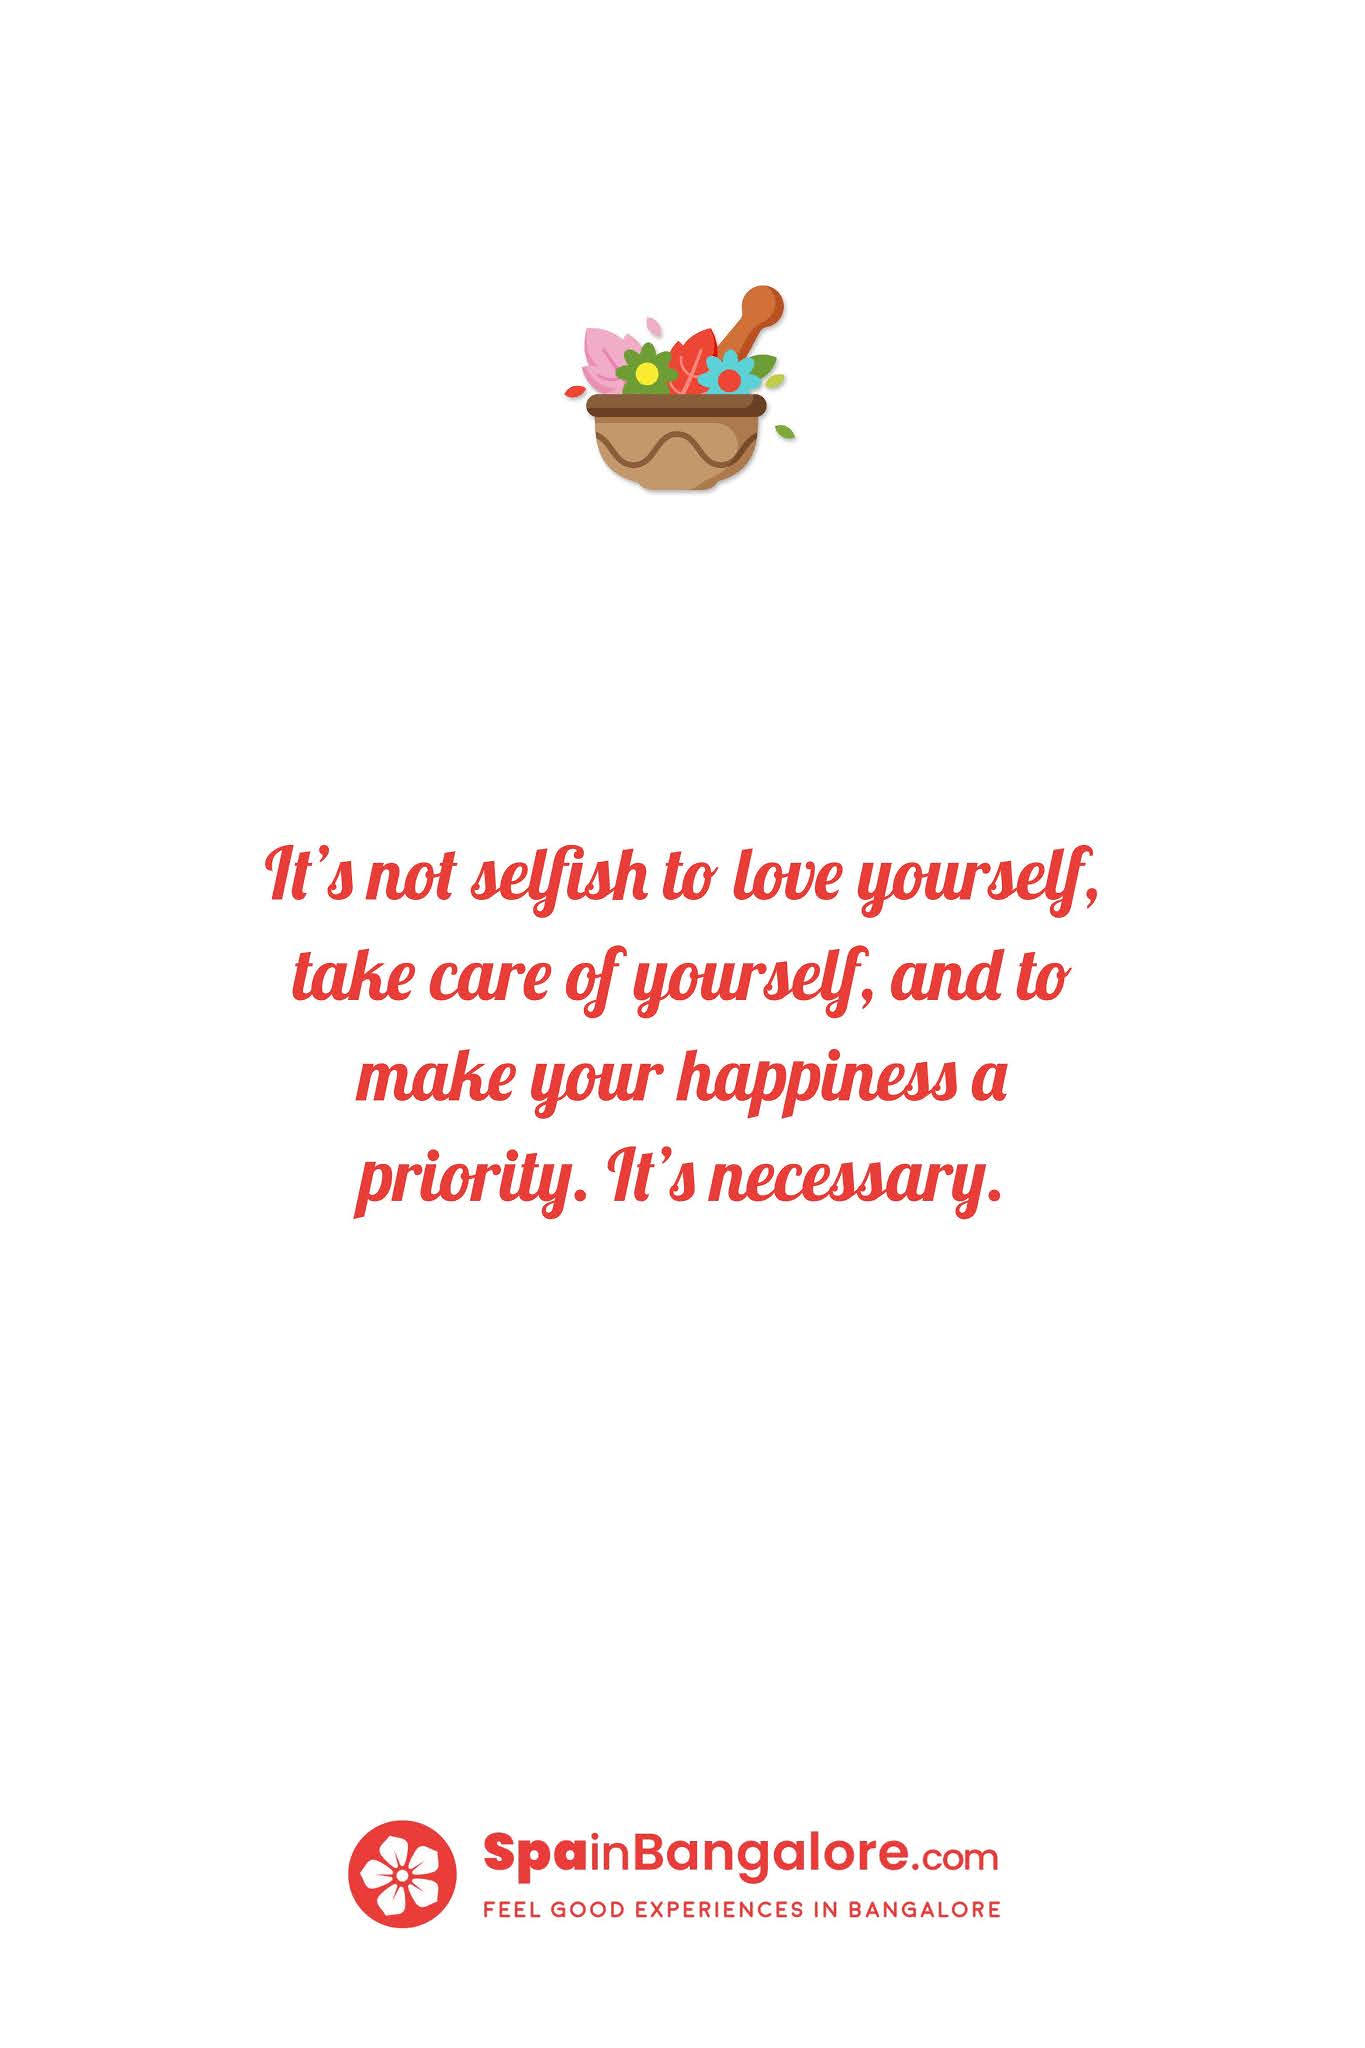 It’s not selfish to love yourself, take care of yourself, and to make your happiness a priority. It’s necessary.